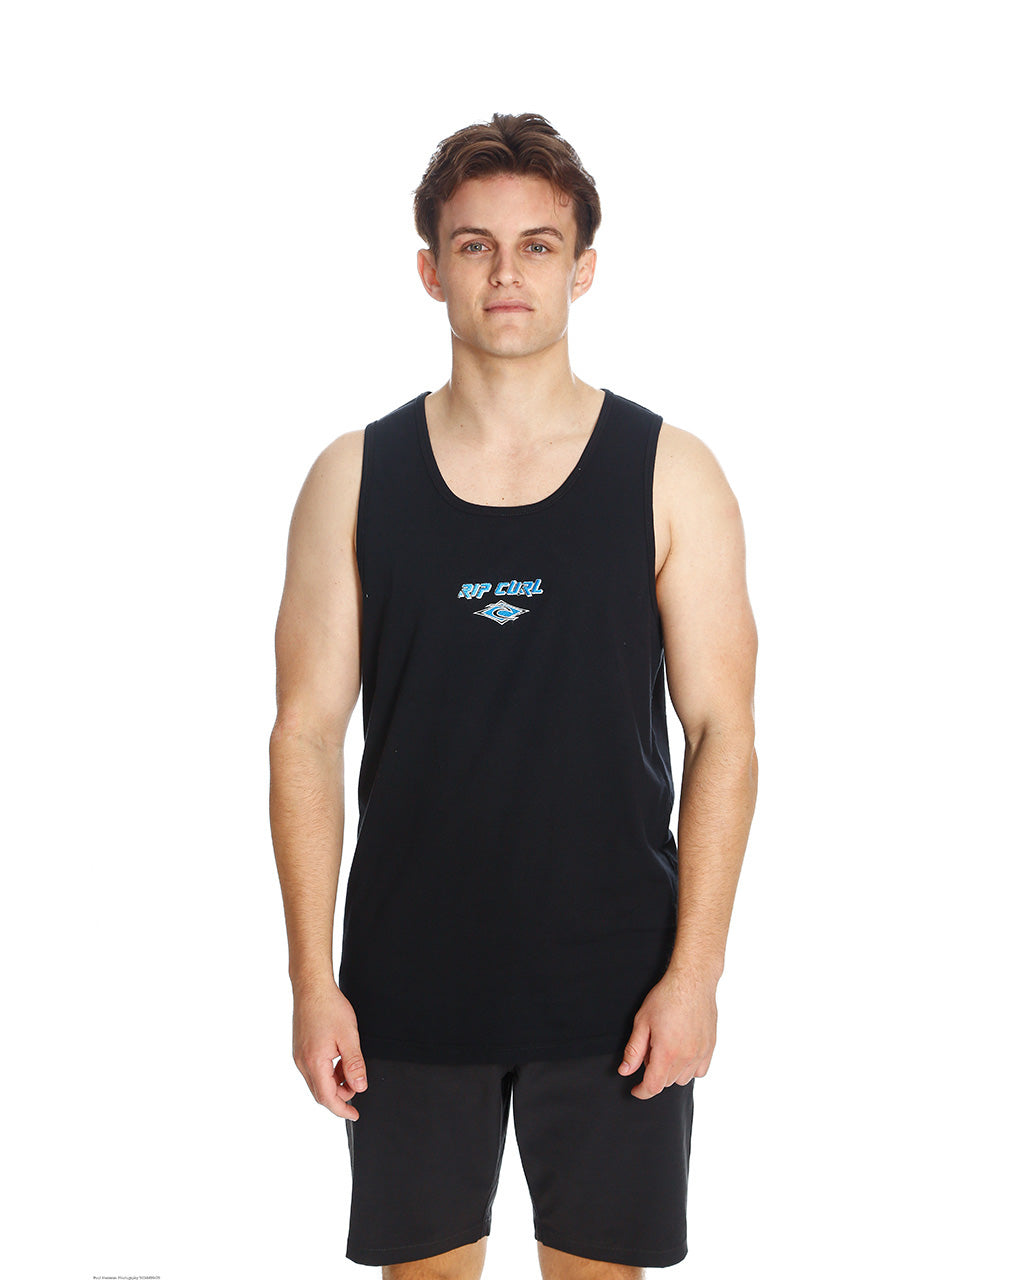 FADE OUT EMBROID TANK